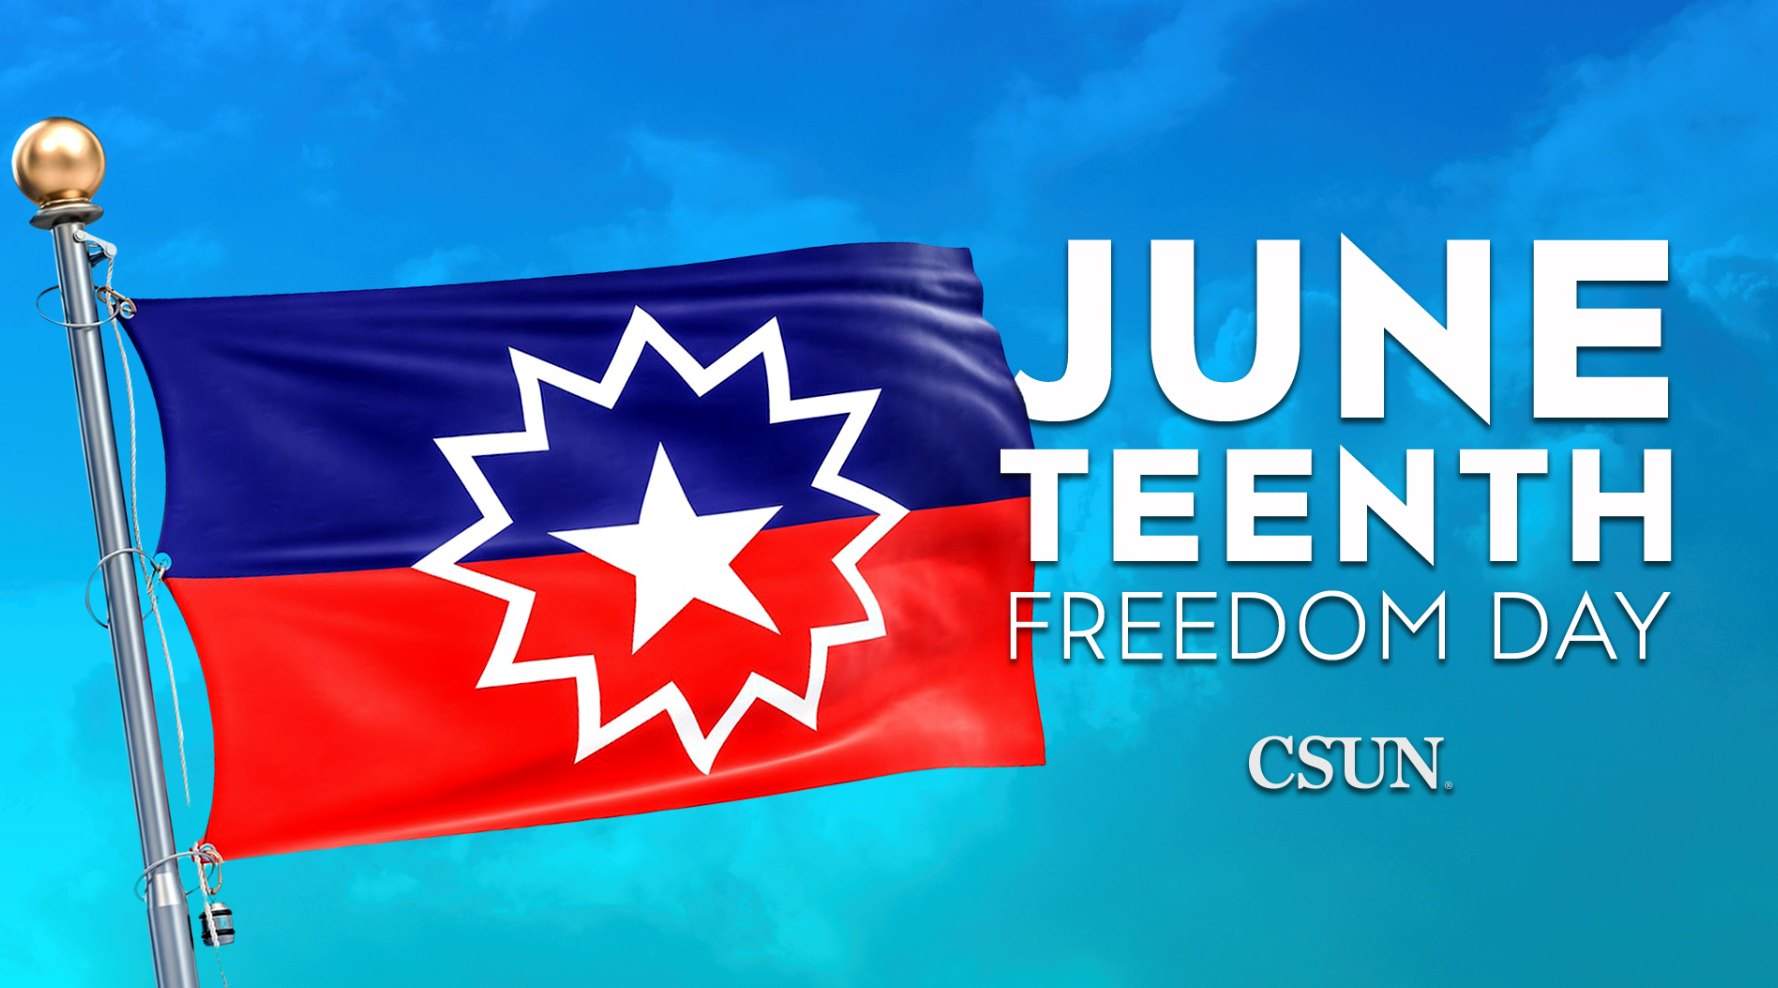 Juneteenth Flag with text: Juneteenth Freedom Day, and the CSUN logo